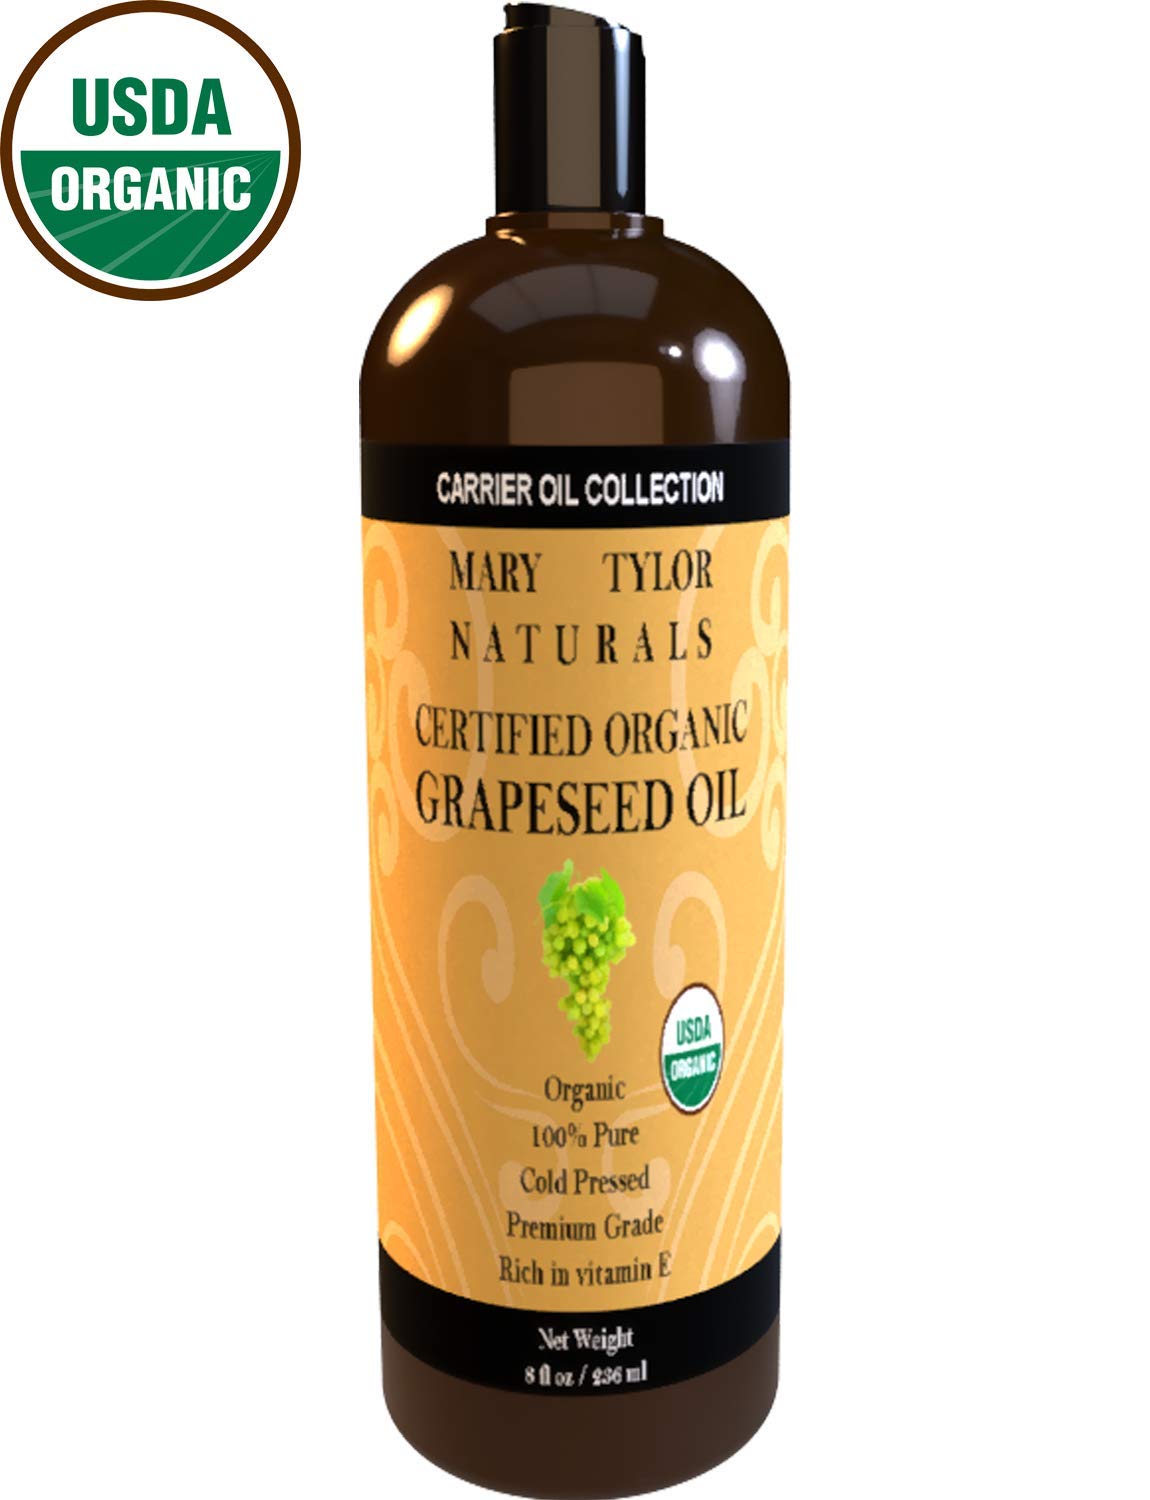 7 Lb, 1 Gal GRAPESEED OIL ORGANIC Carrier Cold Pressed 100% Pure 